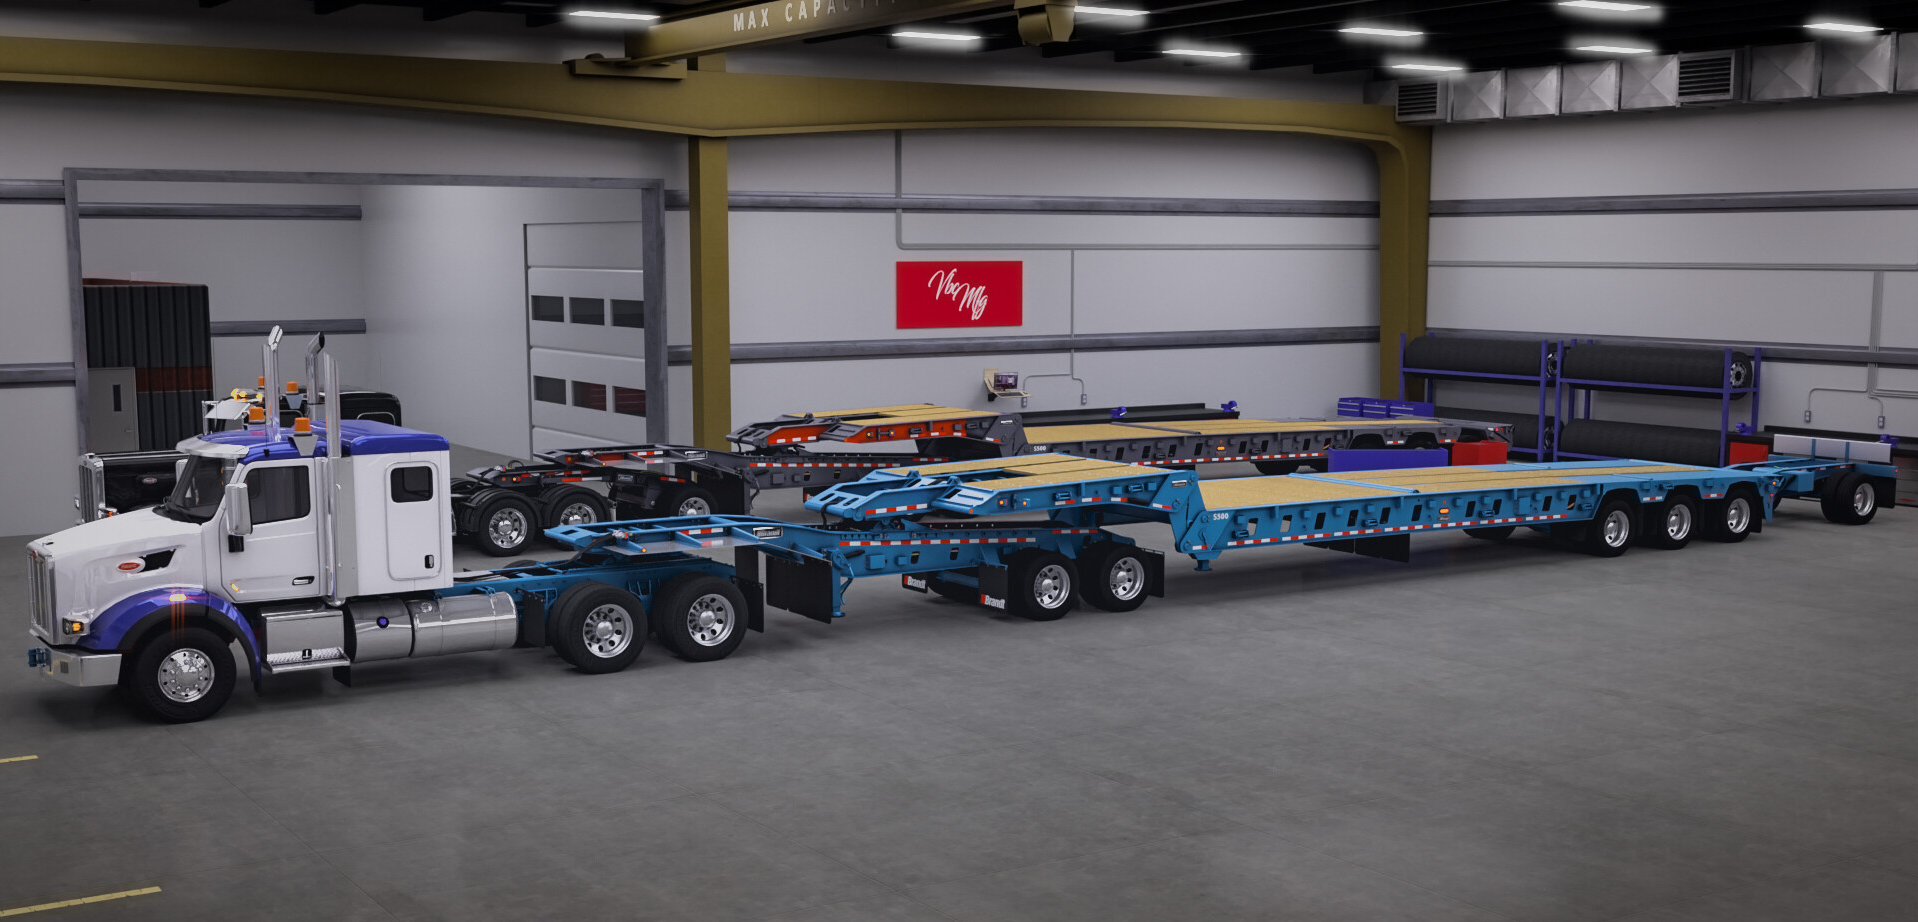 Extendable Stretch Trailers